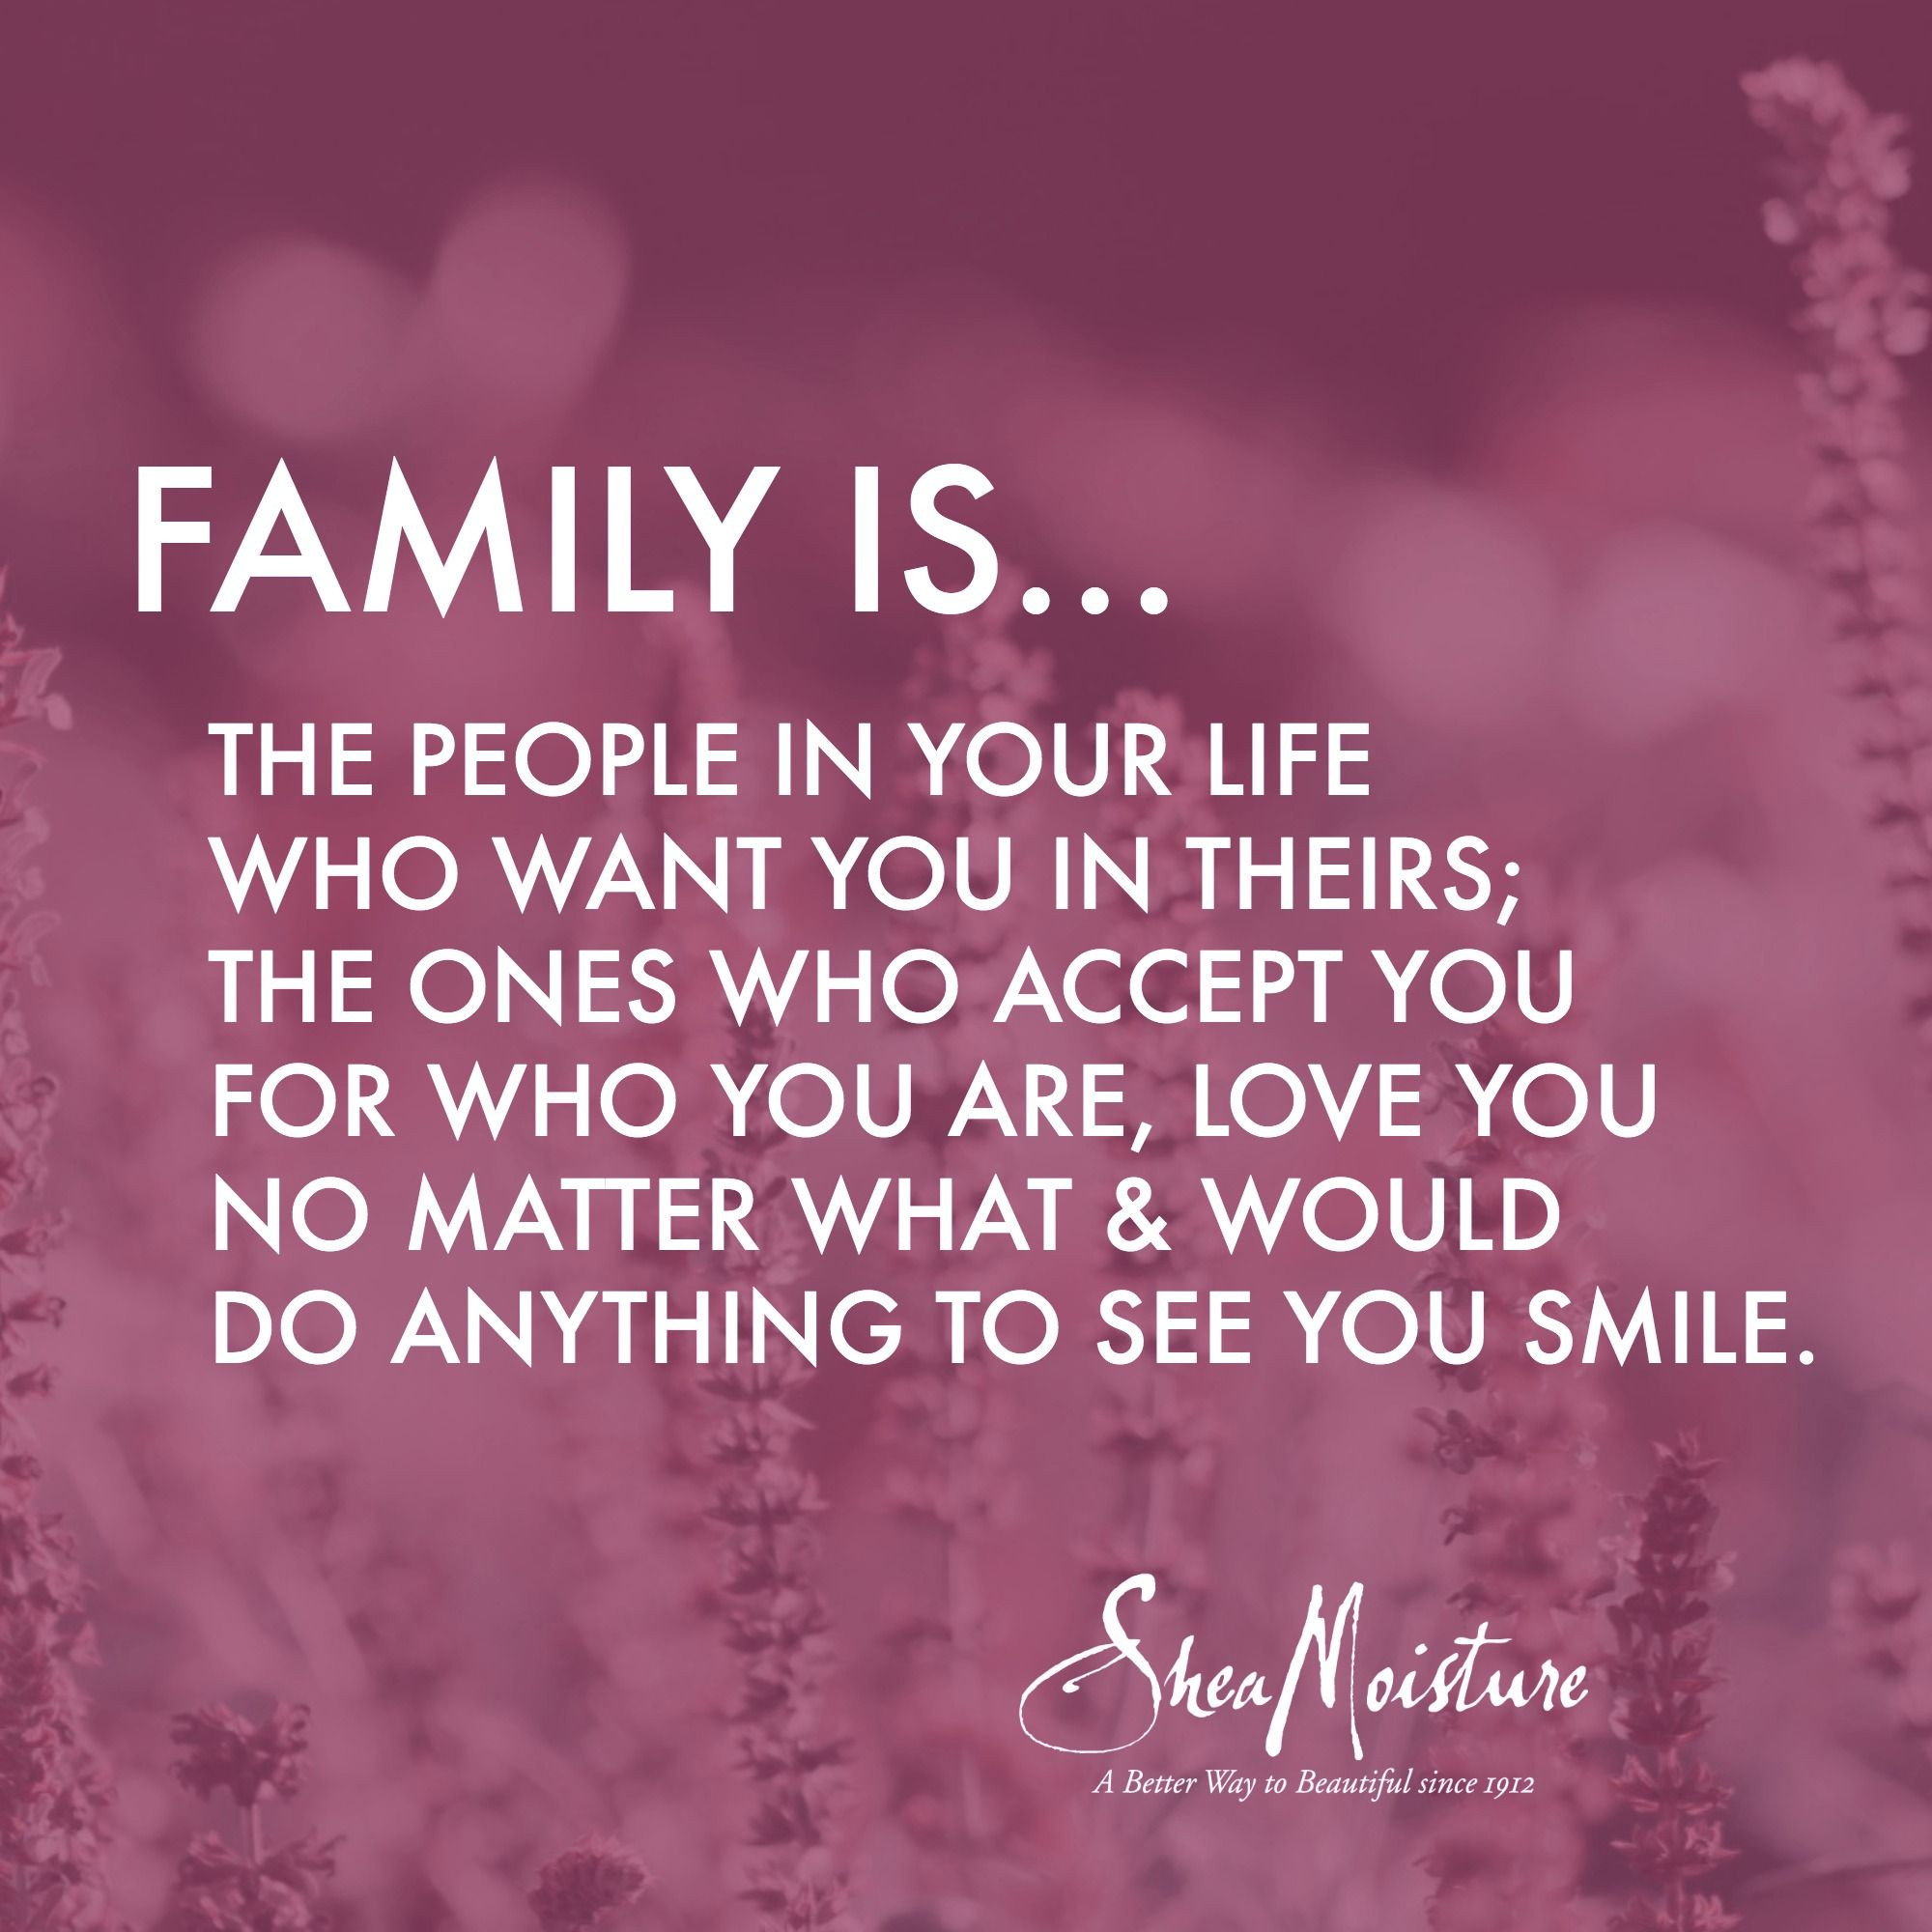 Importance Of Family Quotes
 This Is Important To Me Because It Is Your Family You